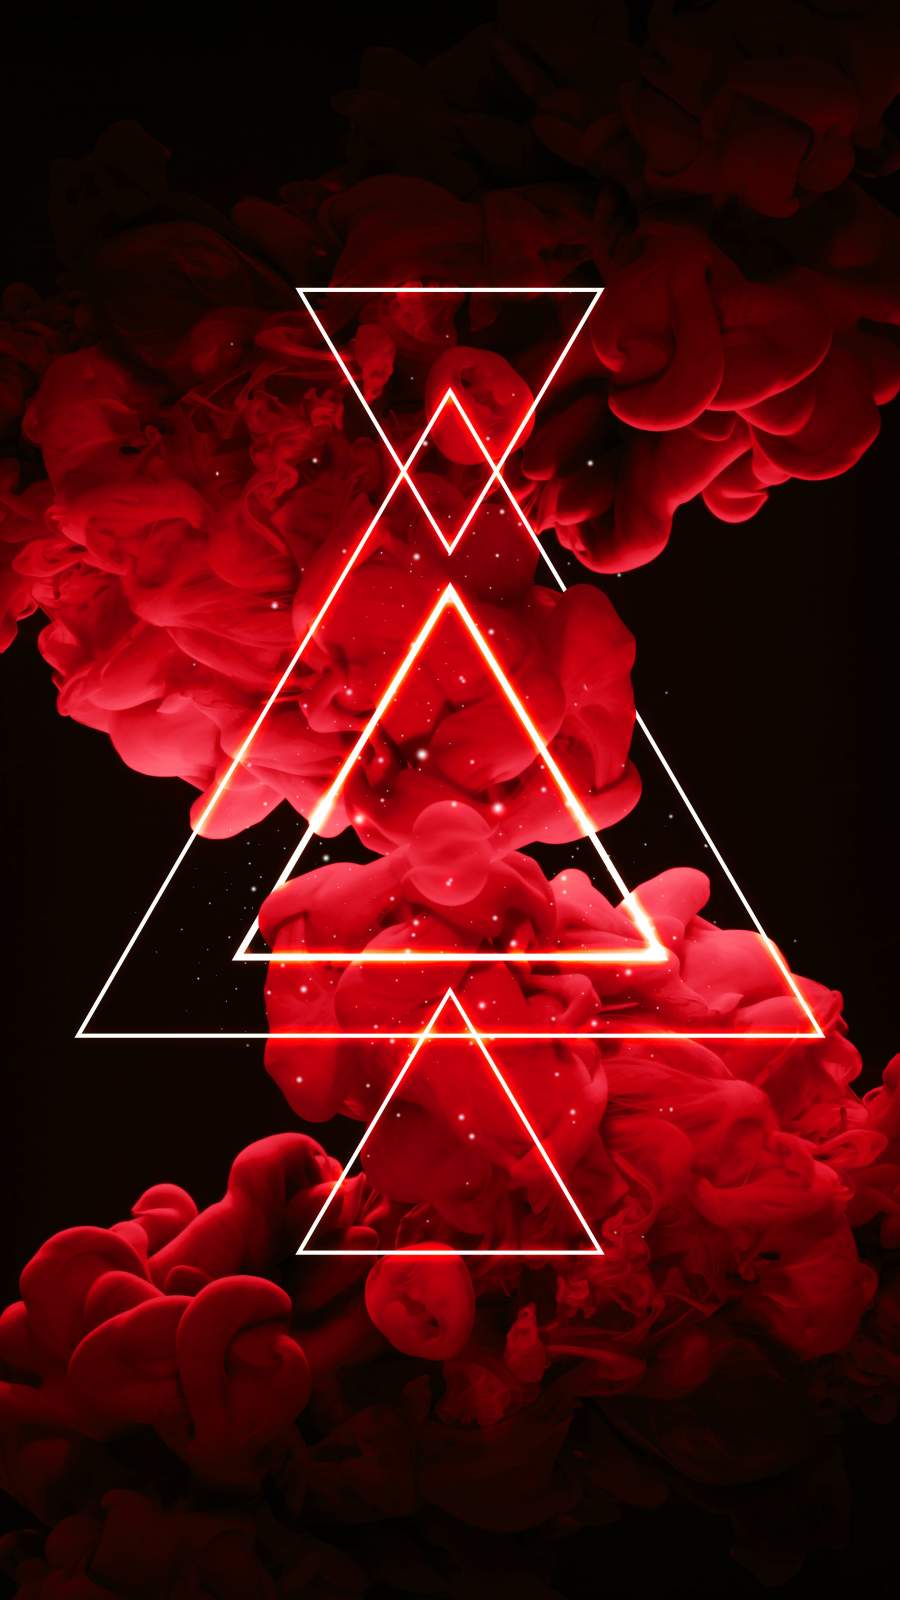 Red Smoke Bomb IPhone Wallpaper - IPhone Wallpapers : iPhone Wallpapers